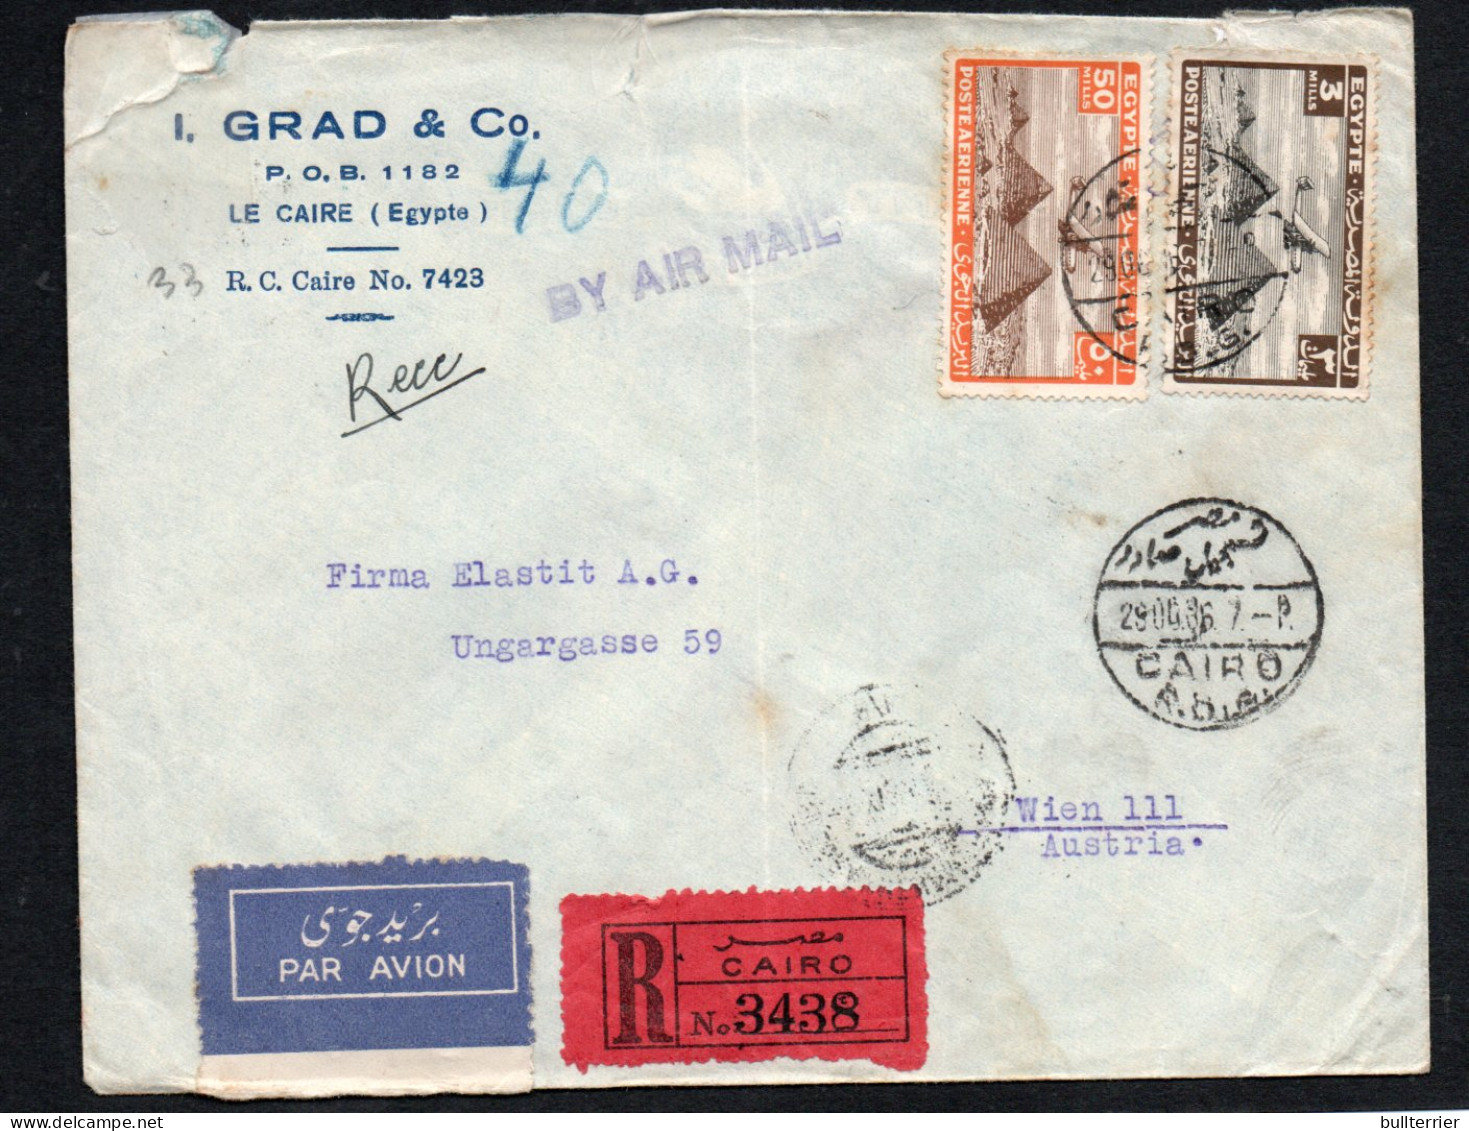 EGYPT - 1936 - IMPERIAL AIRWAYS REGISTERED COVER CAIRO TO VIENNA ,AUSTRIA WITH BACKSTAMP - Covers & Documents